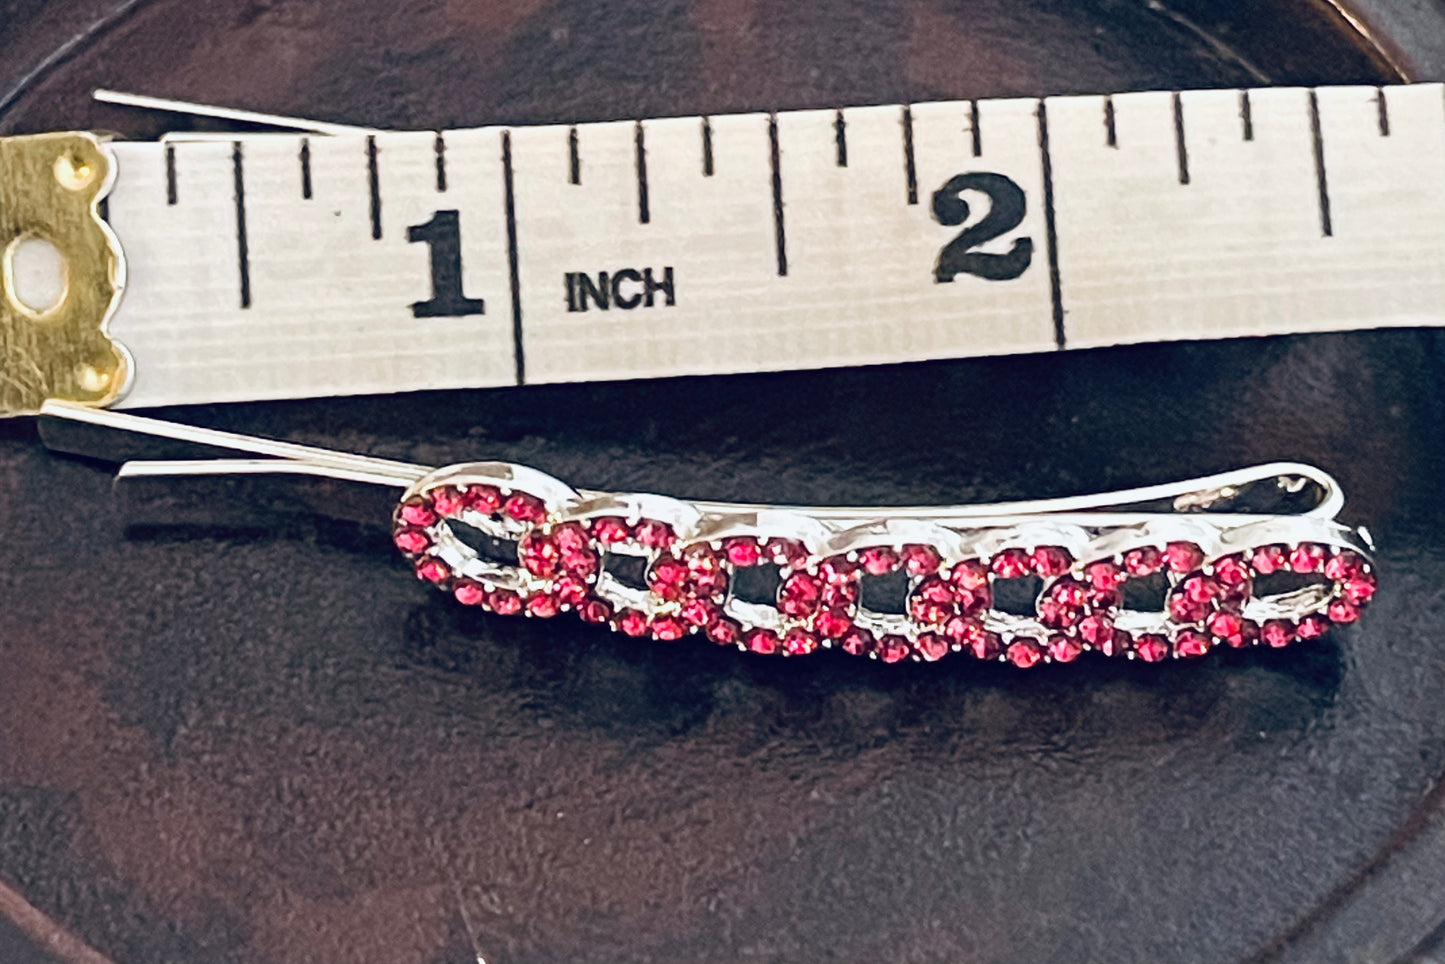 Pink Crystal rhinestone hairpins 2pc approximately 2.5”silver tone  formal hair accessories gift wedding bridesmaid princess accessory